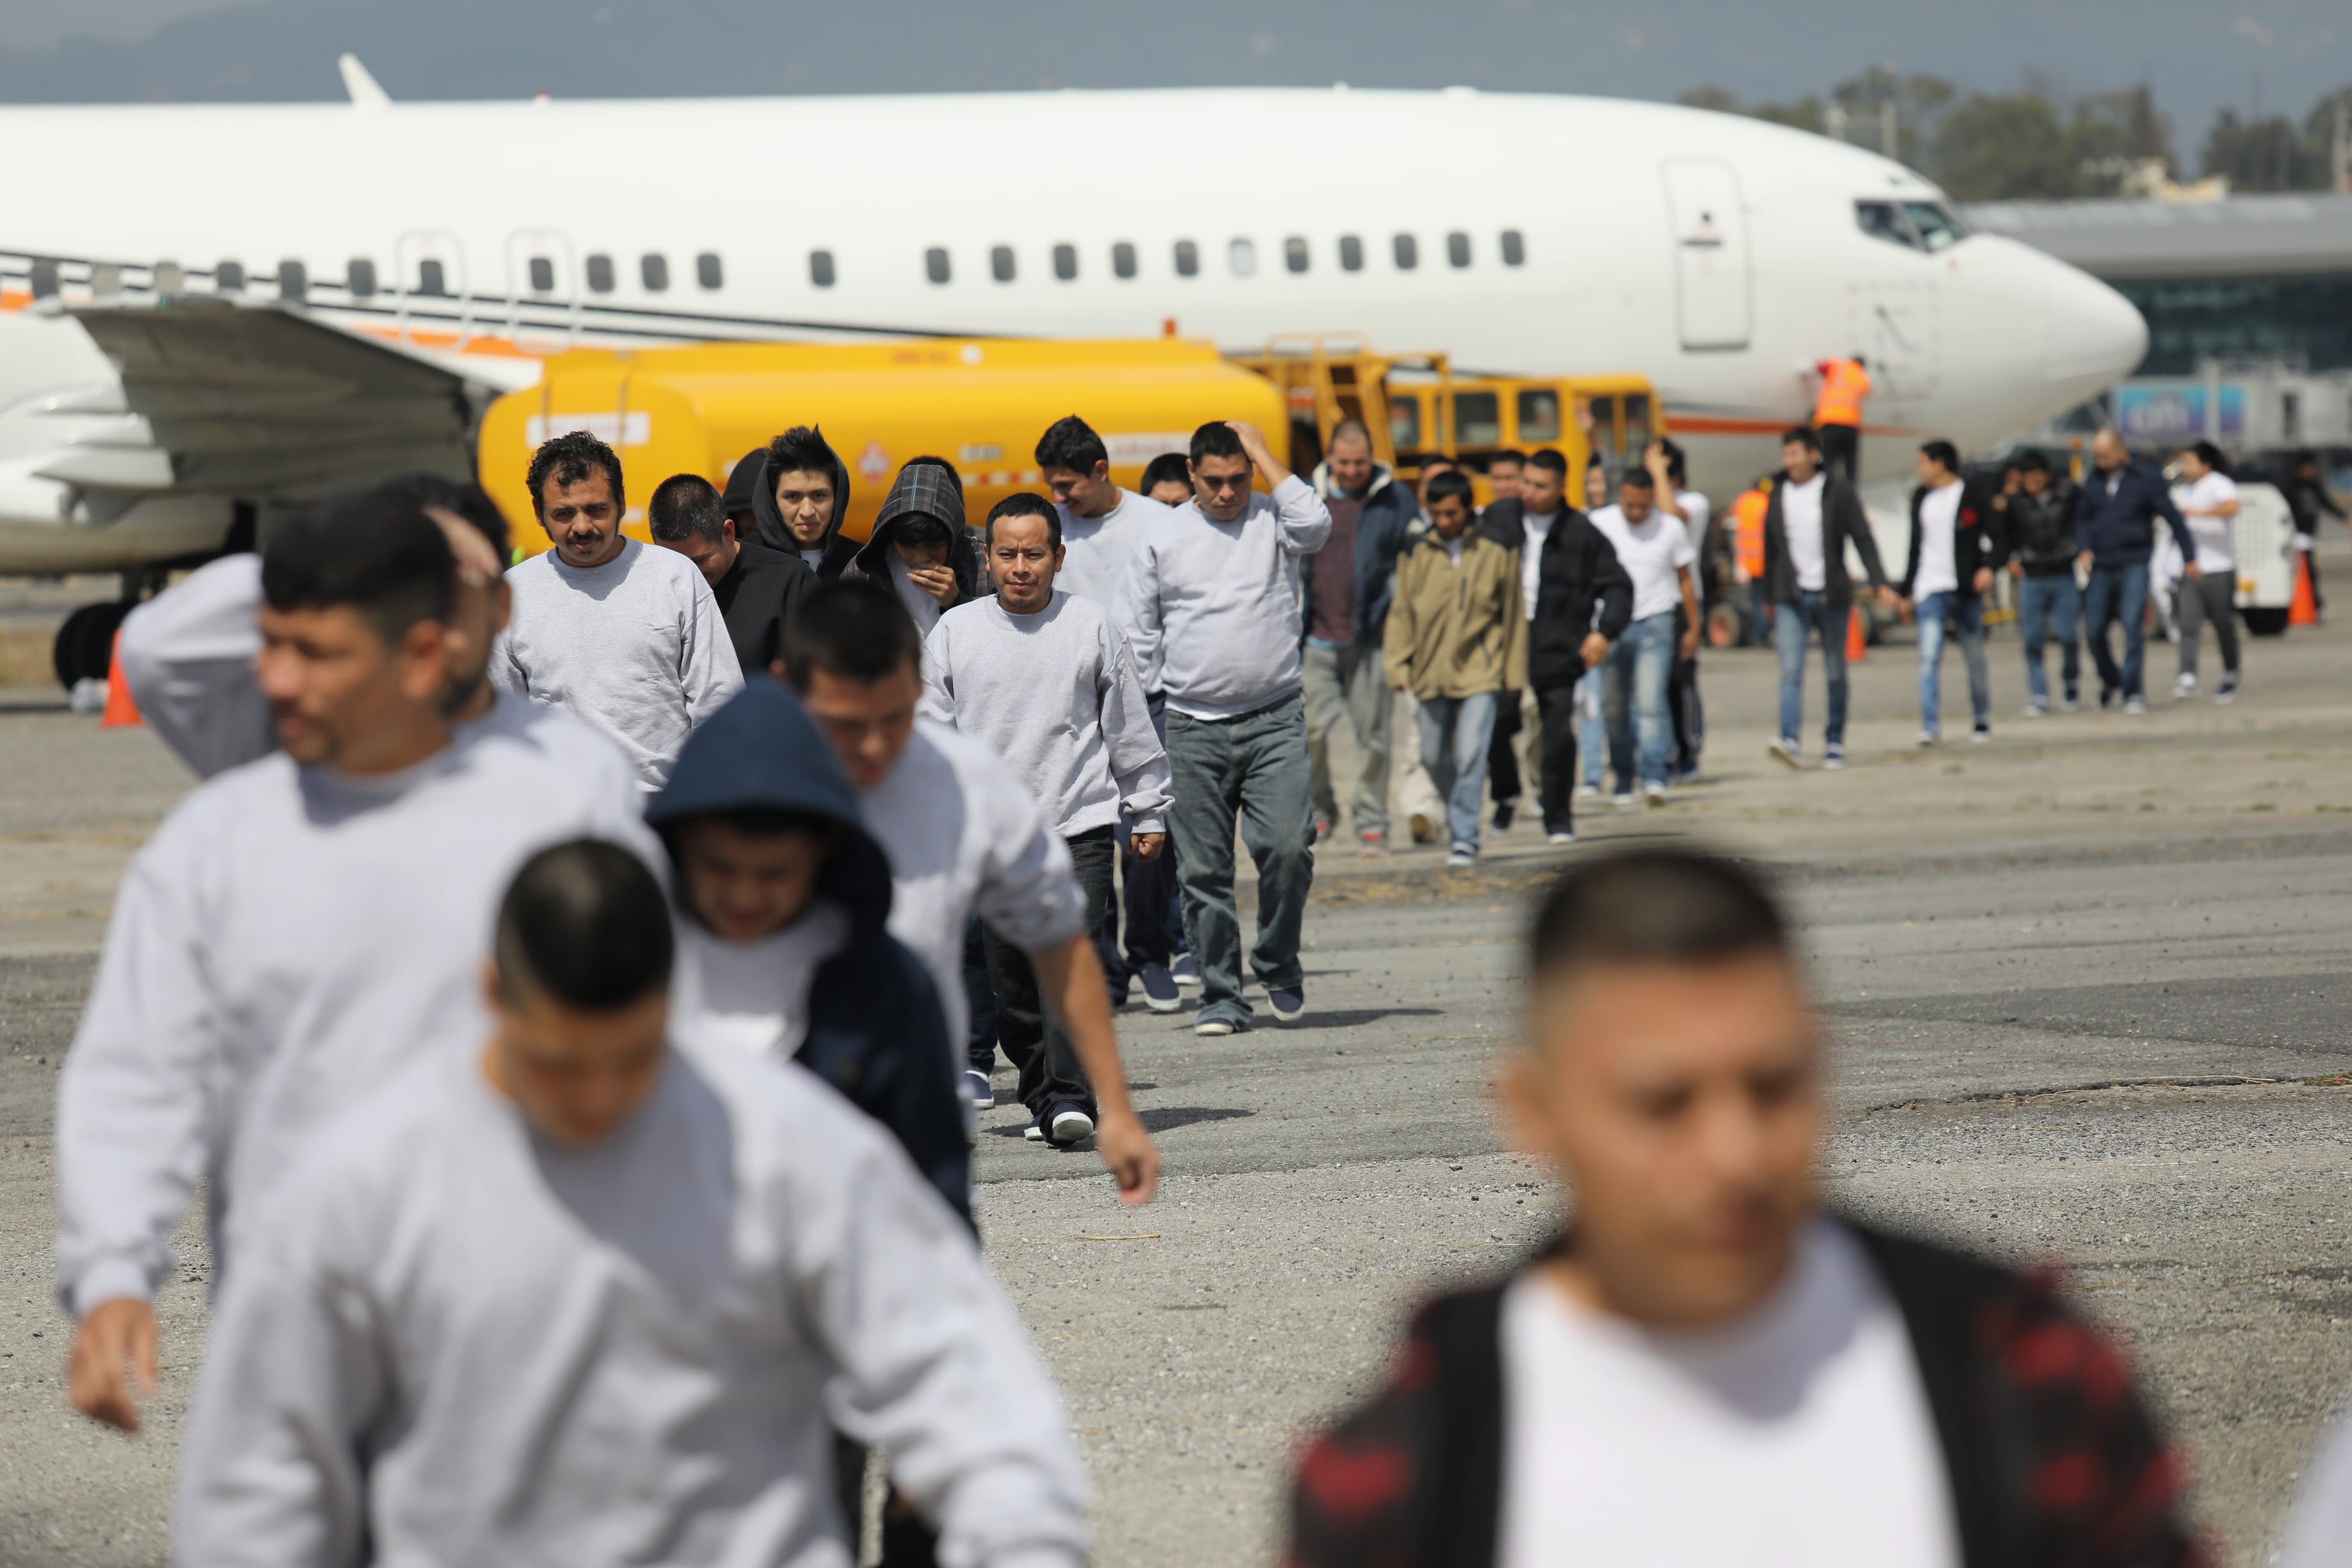 deportation of illegal immigrants process